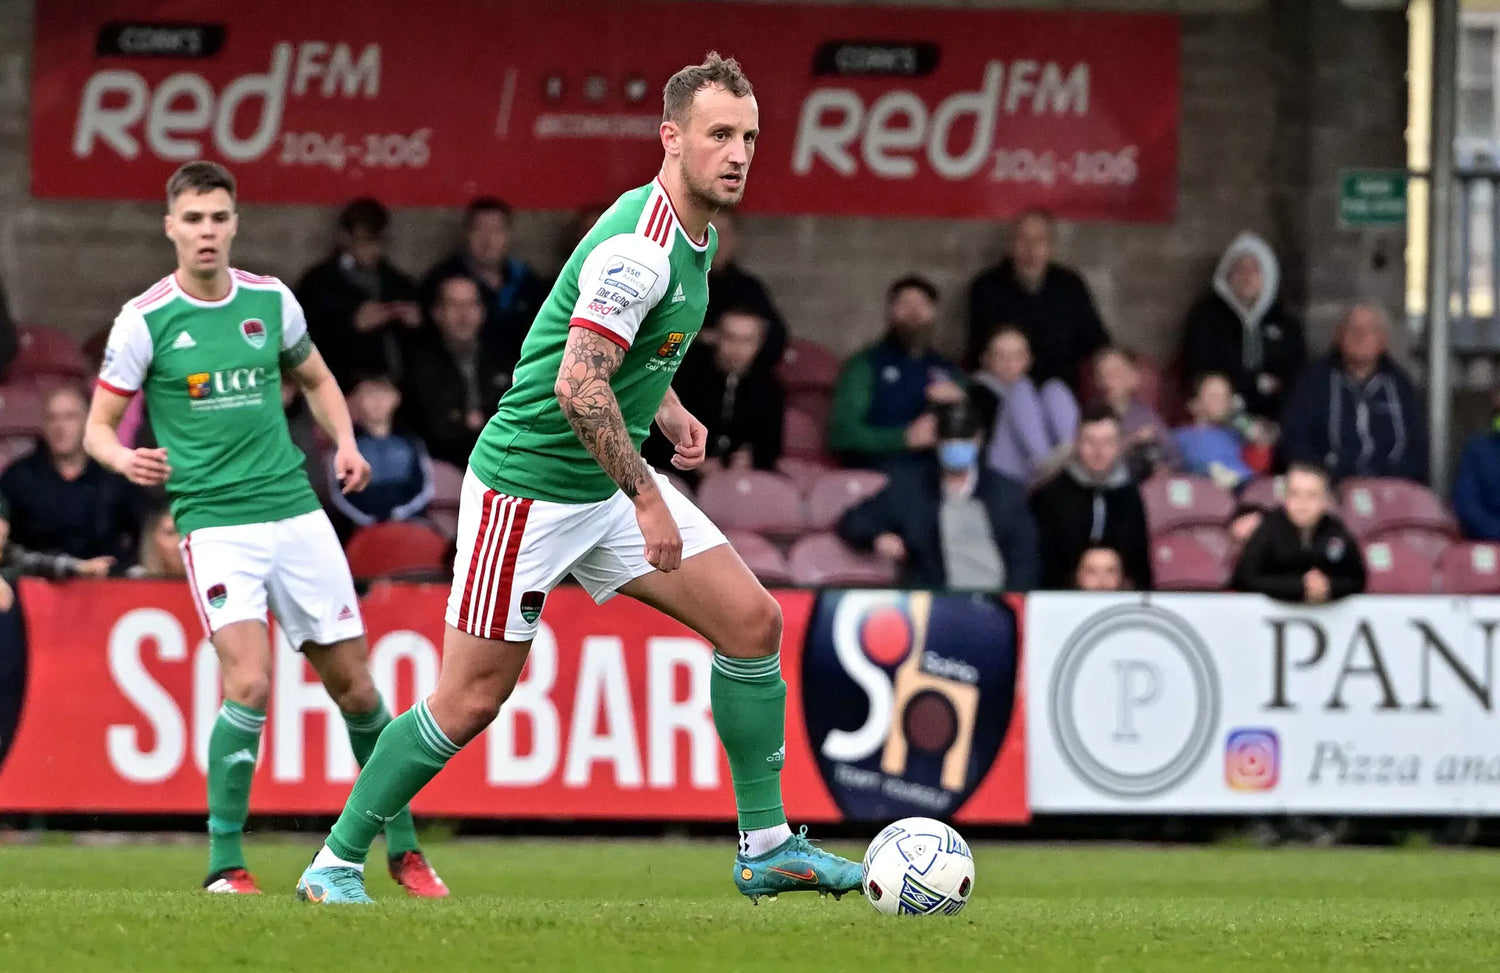 Preview: Bray Wanderers vs City